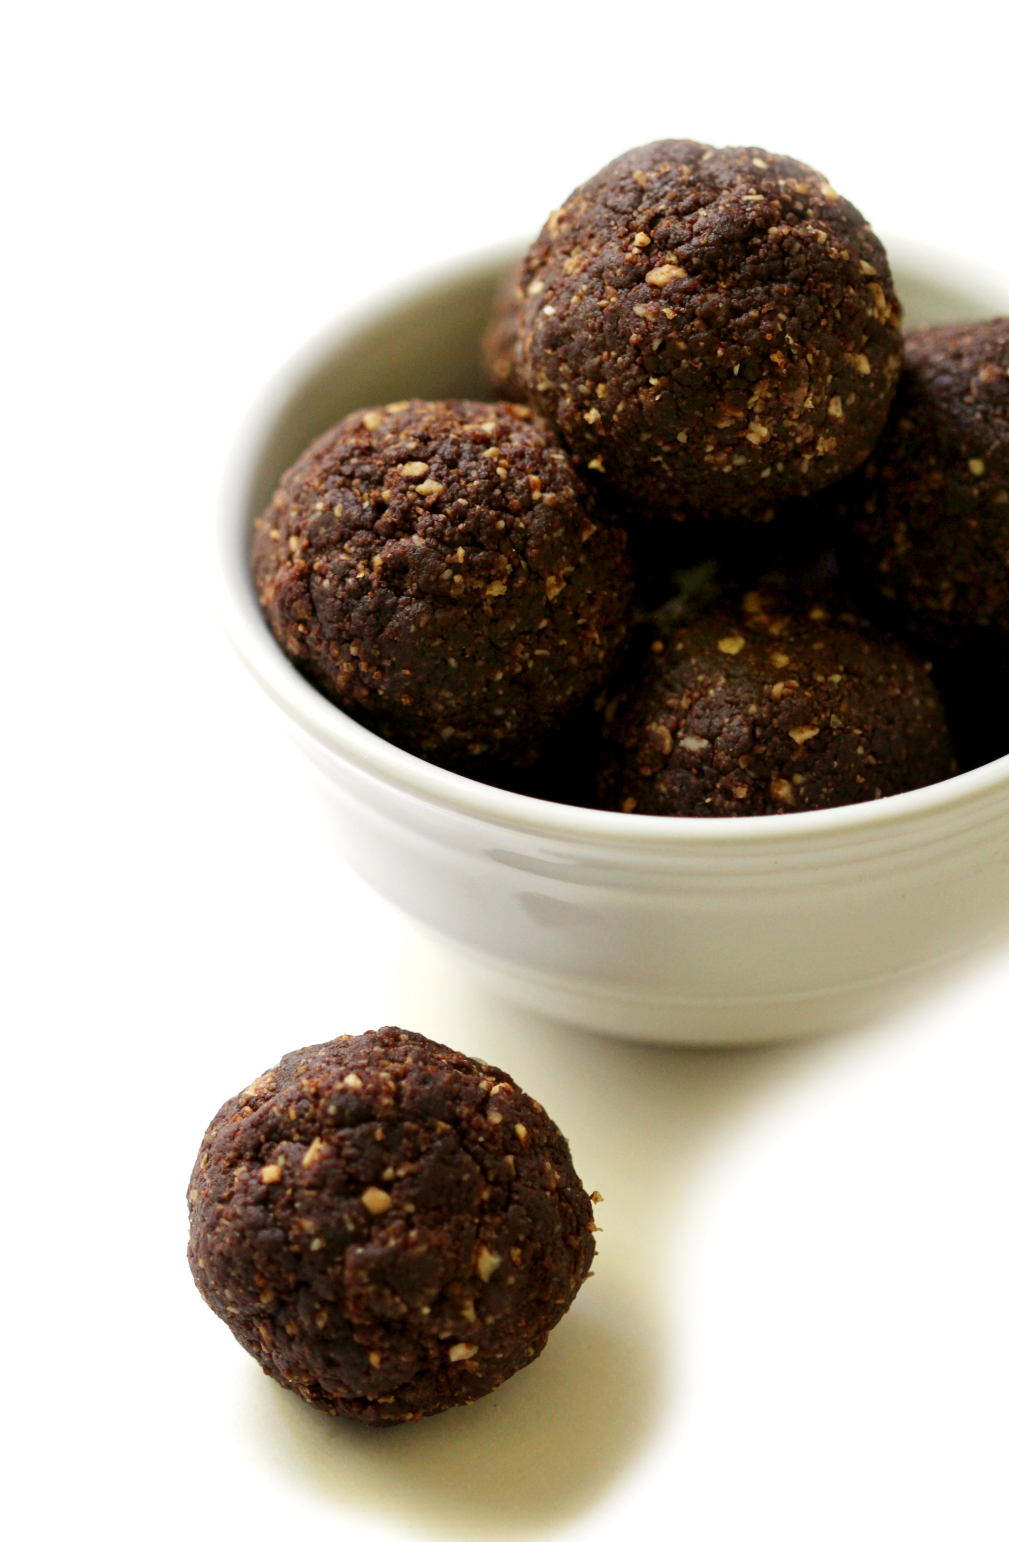 Chocolate Peanut Butter Power Balls | Strength and Sunshine @RebeccaGF666 Get your chocolate and peanut butter fix with these healthy, gluten-free, vegan, and grain-free Chocolate Peanut Butter Power Balls! A yummy protein-packed snack recipe for all ages and bite sizes!